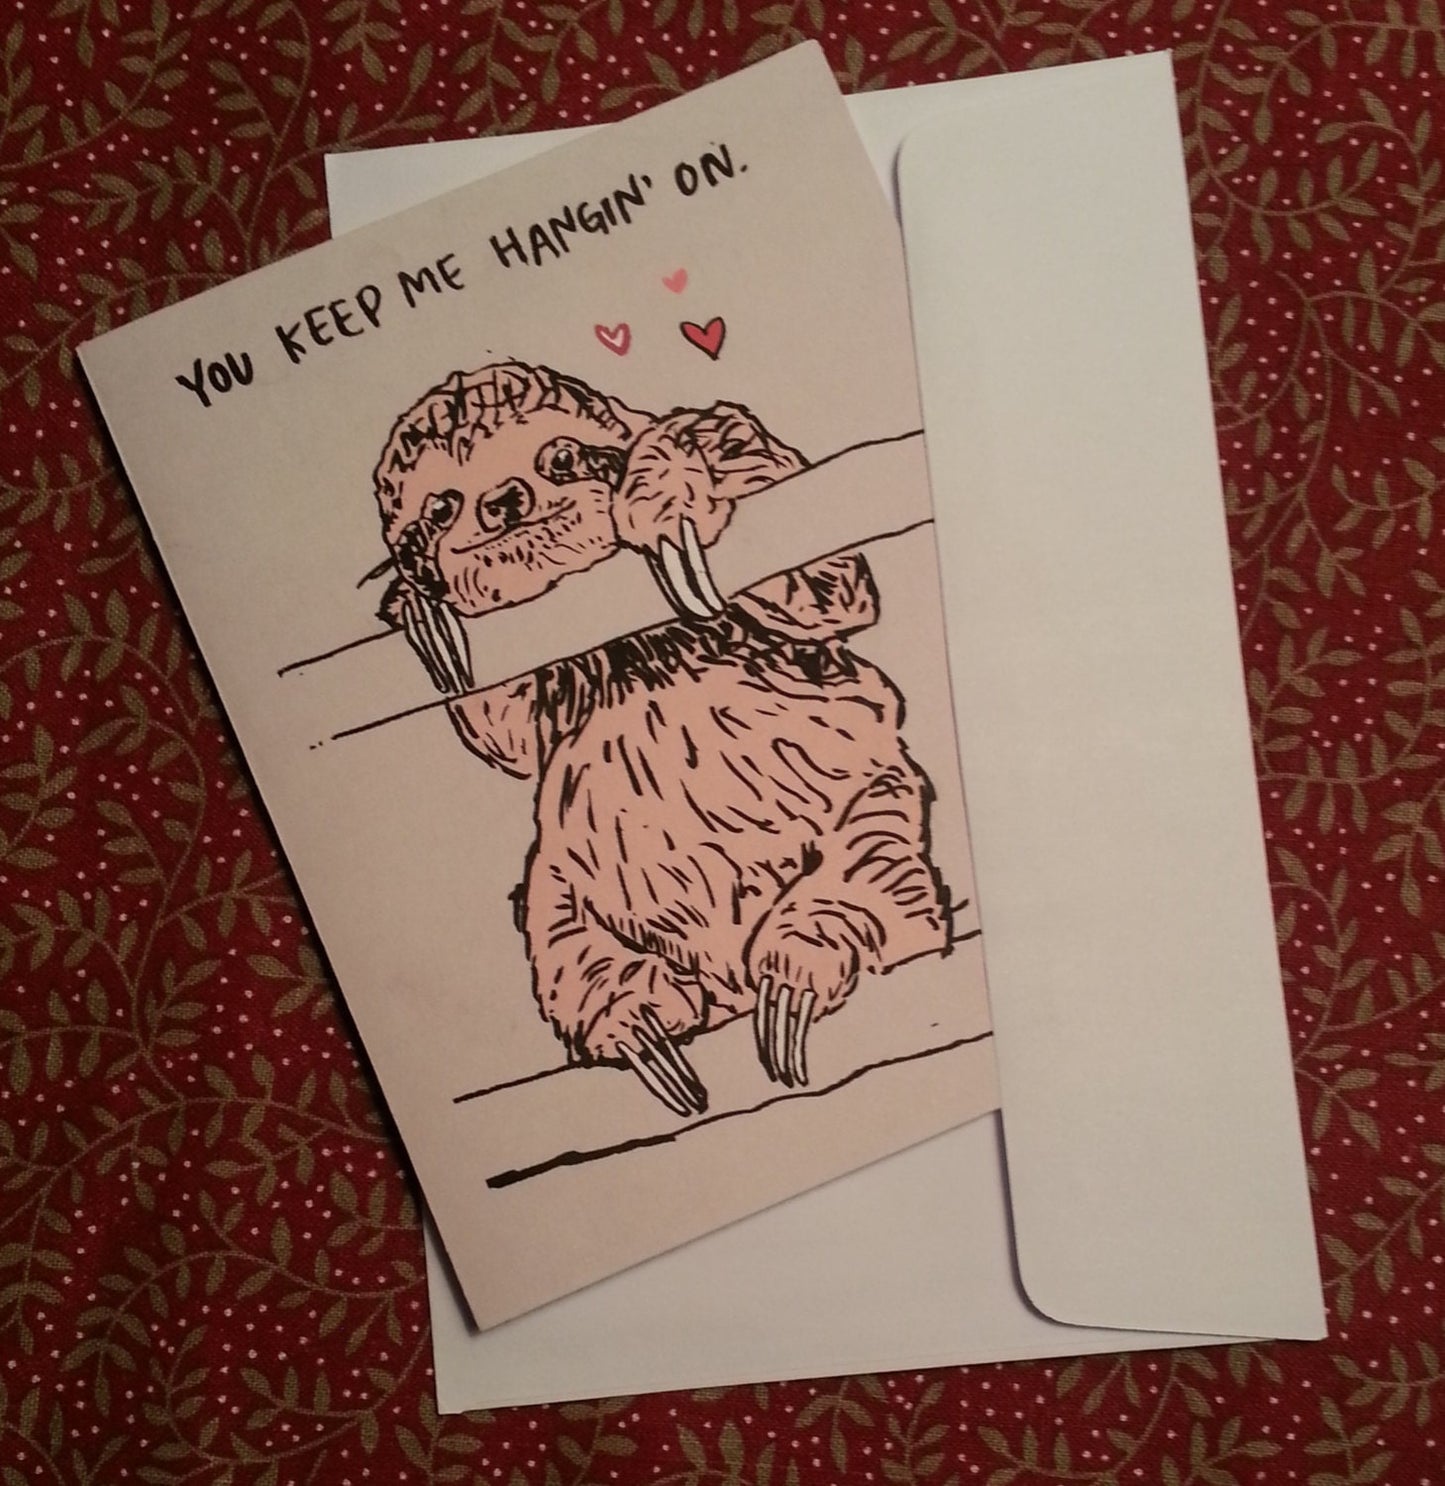 Valentine's Day Card - You Keep Me Hangin' On